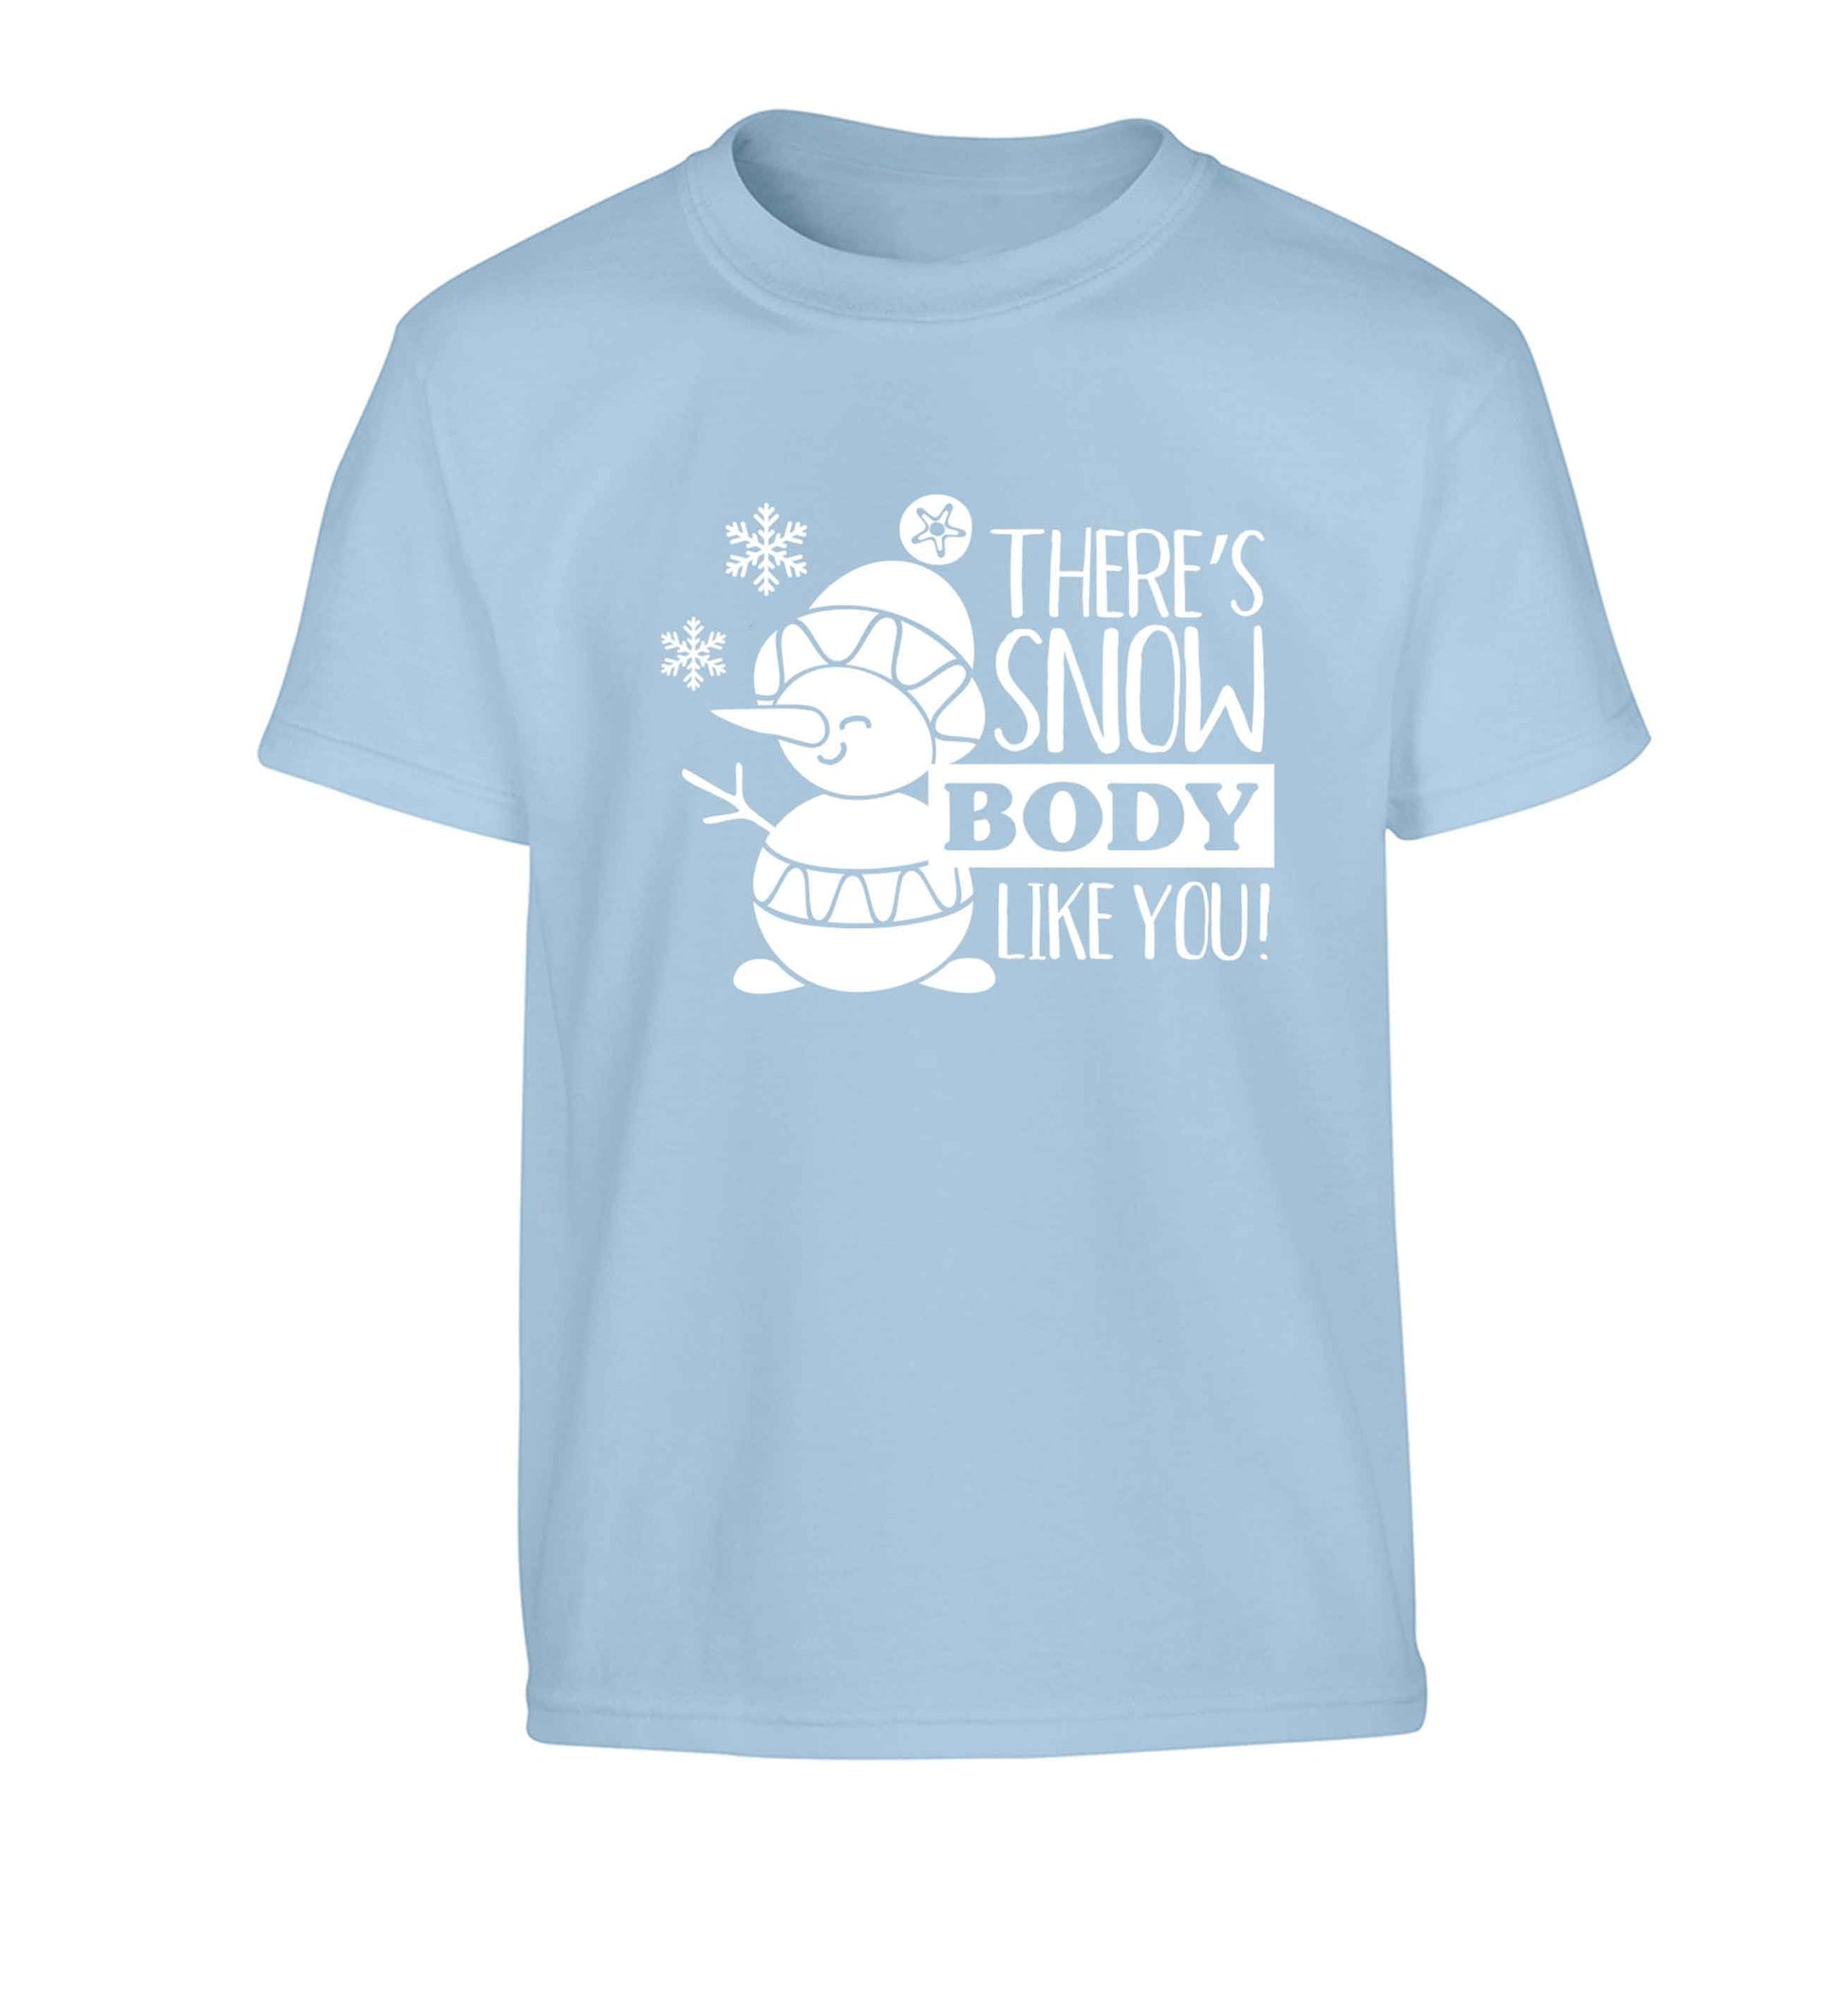 There's snow body like you Children's light blue Tshirt 12-13 Years